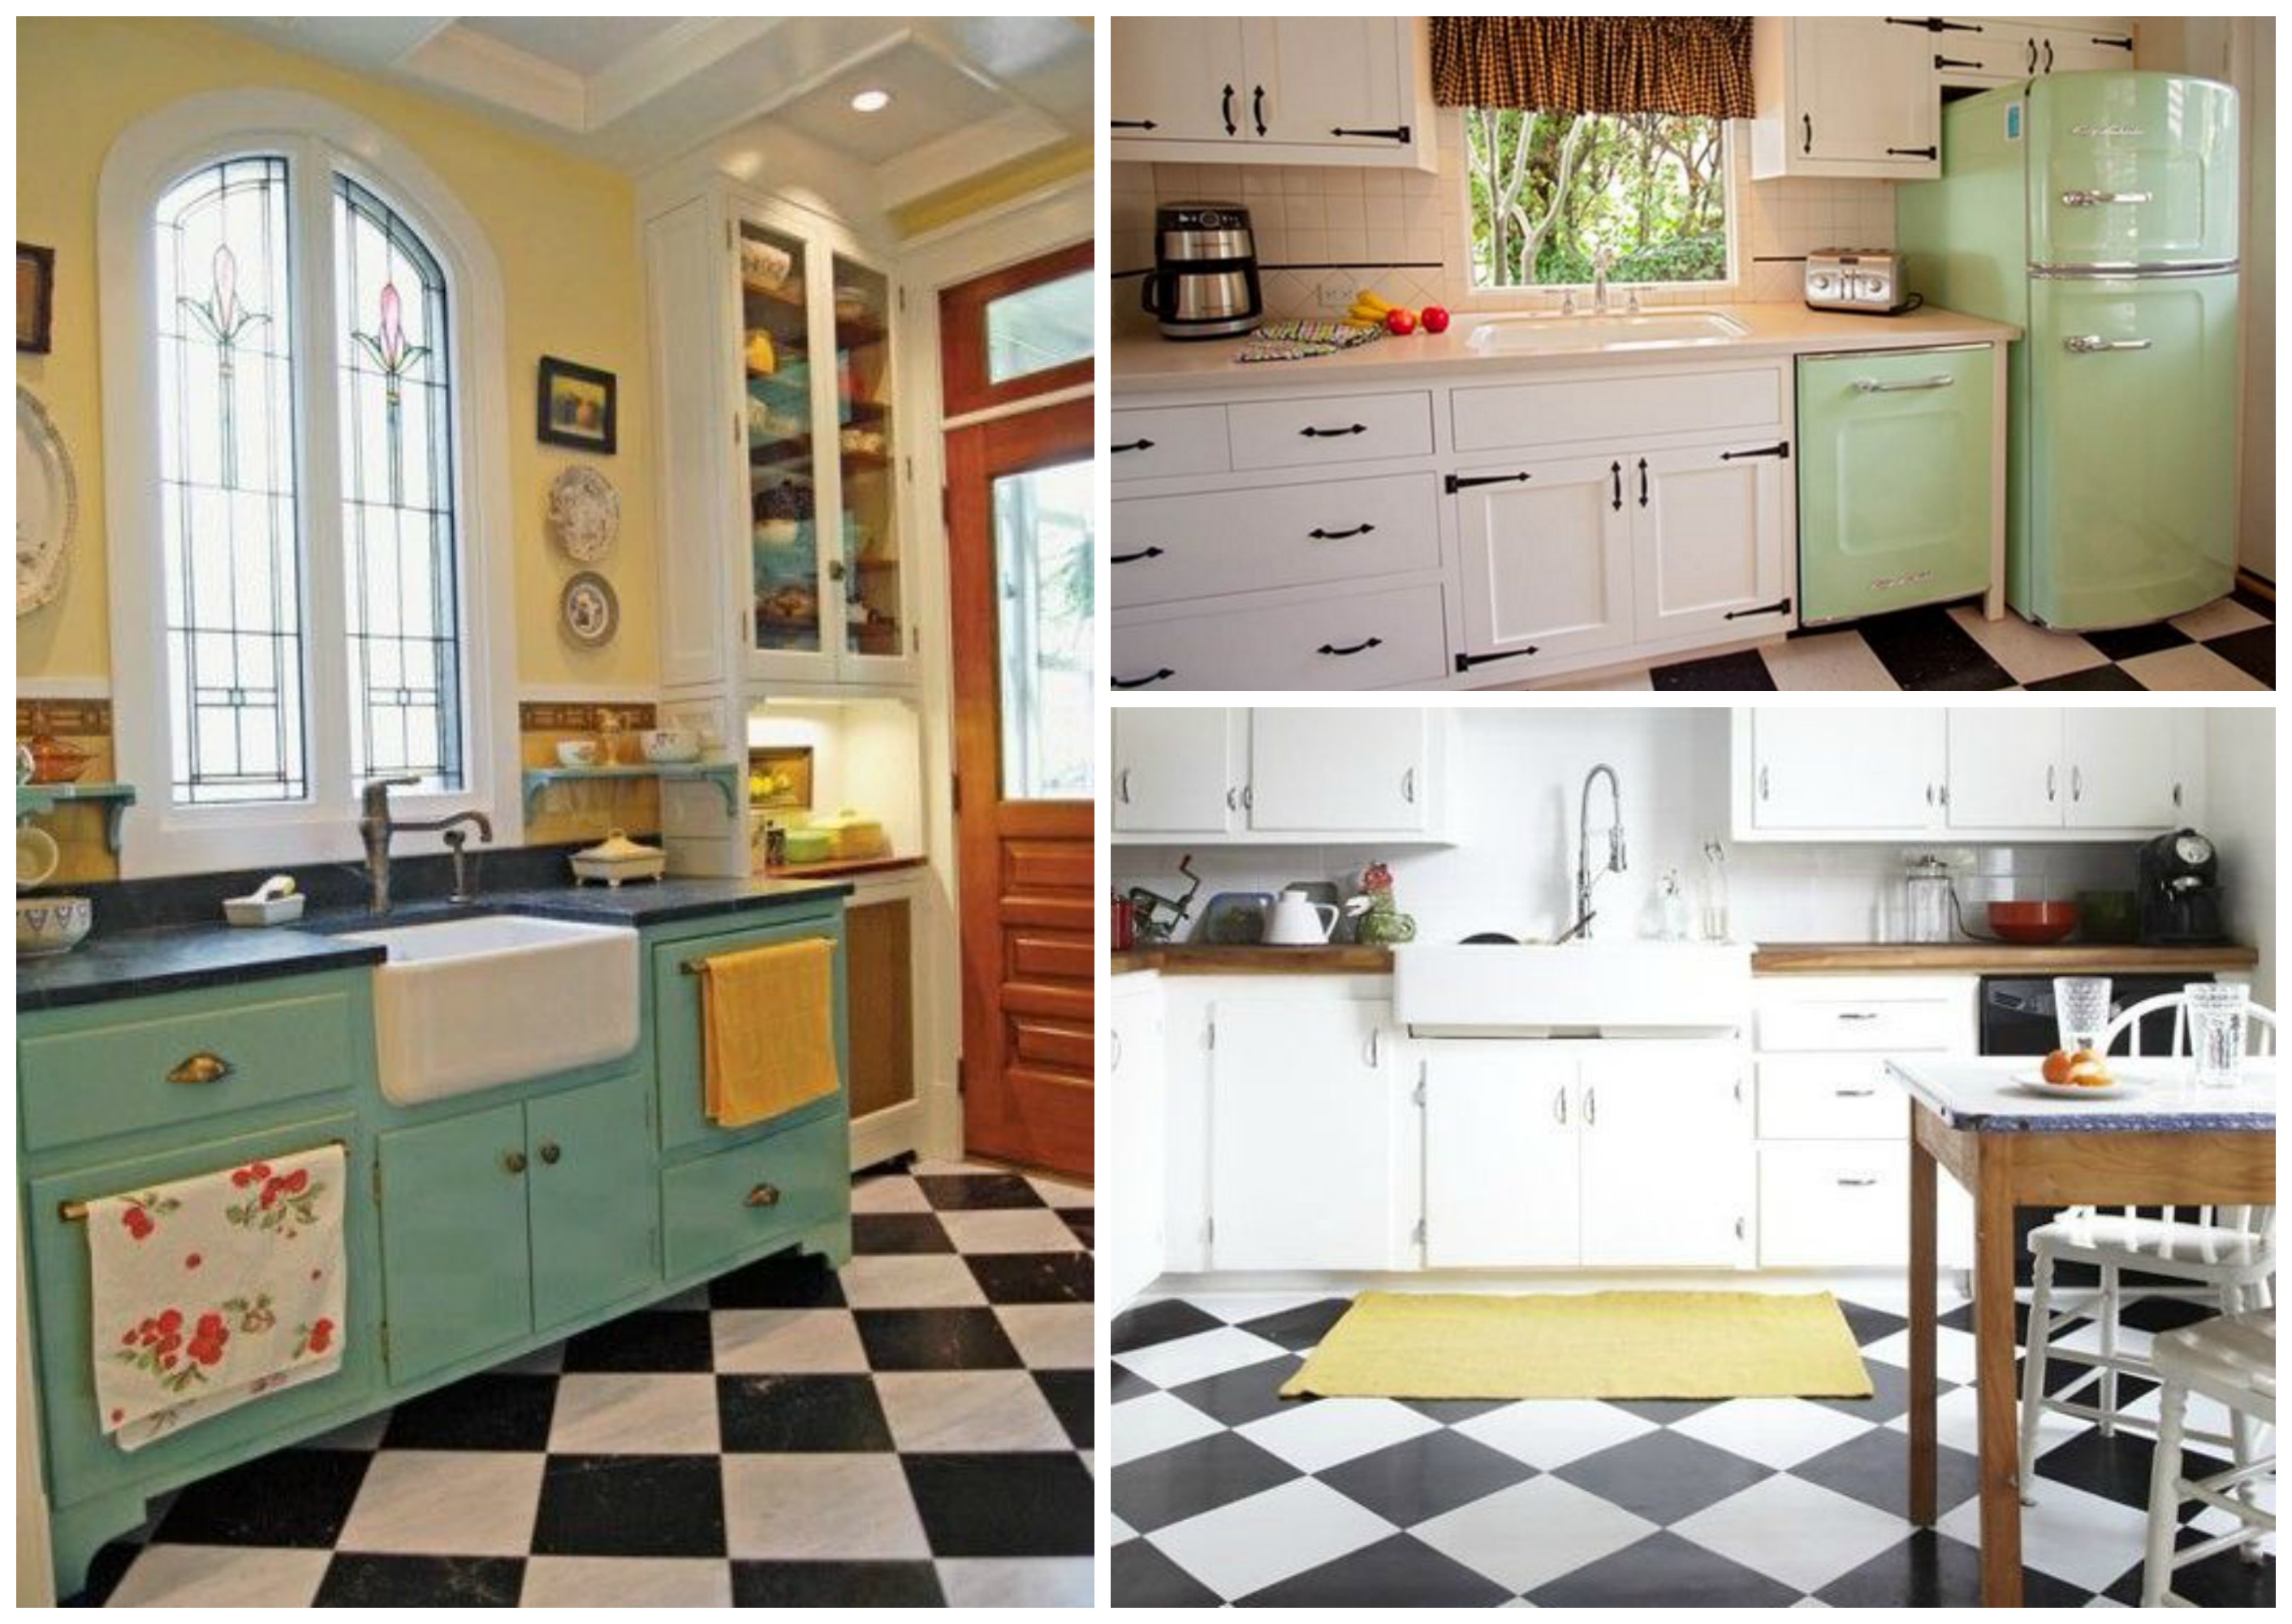 Retro kitchens if creating a true retro kitchen, a checkered tile floor is an absolute SVTTLDL